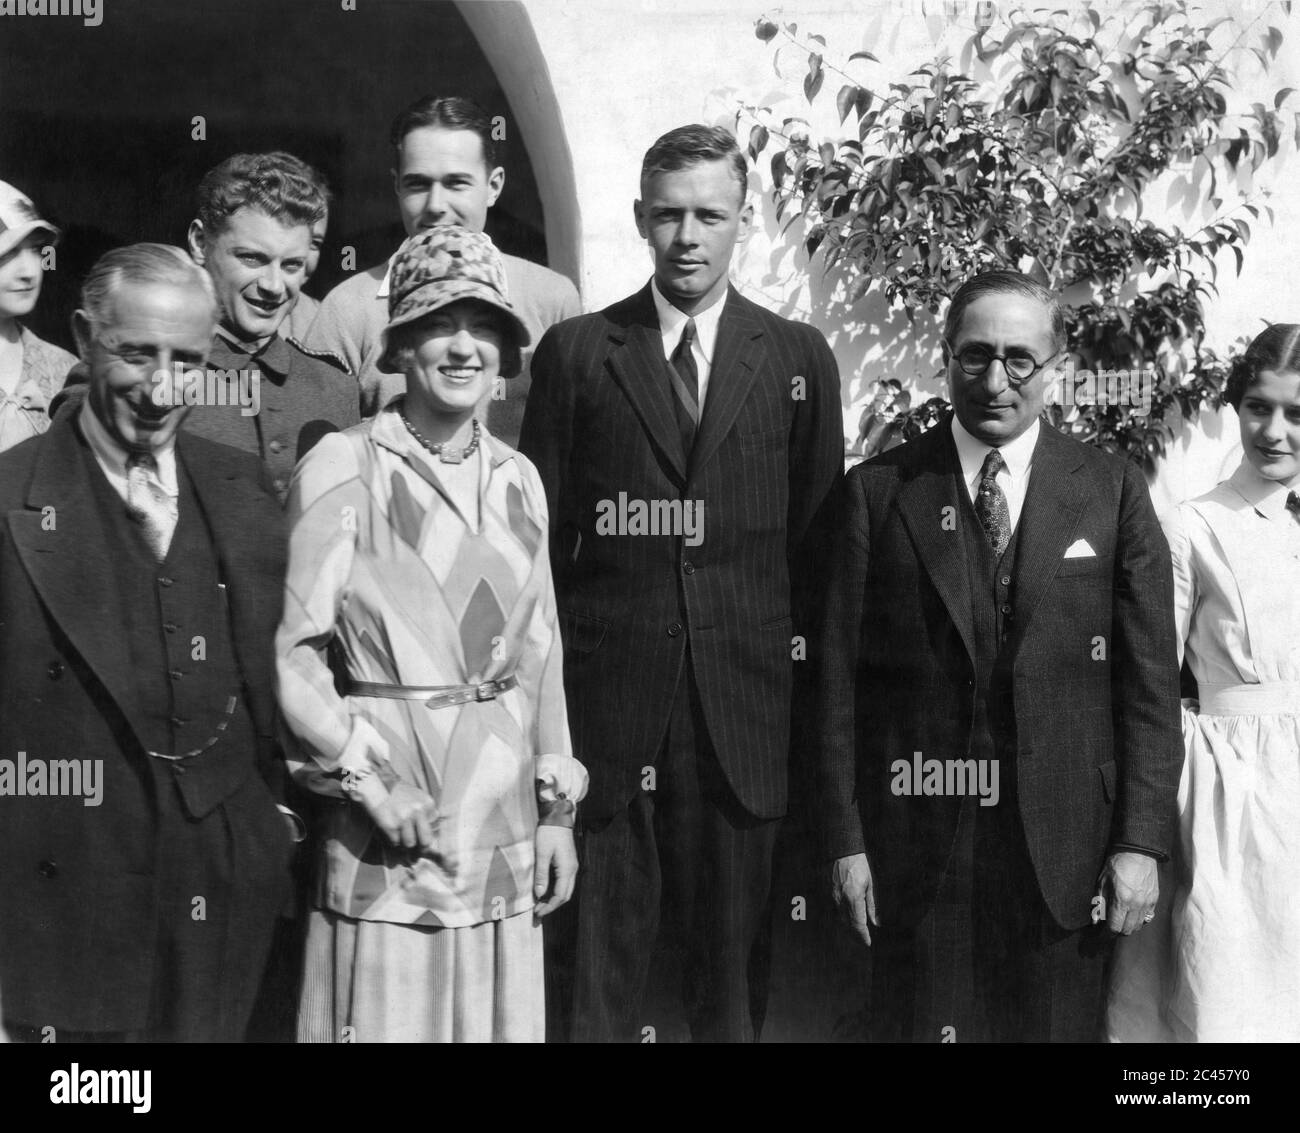 Colonel CHARLES LINDBERGH (centre) visits MGM Studios in Hollywood 1927 surrounded by producer HARRY RAPF RALPH FORBES MARION DAVIES WILLIAM HAINES LOUIS B. MAYER and MARCELLINE DAY Metro Goldwyn Mayer Publicity Stock Photo